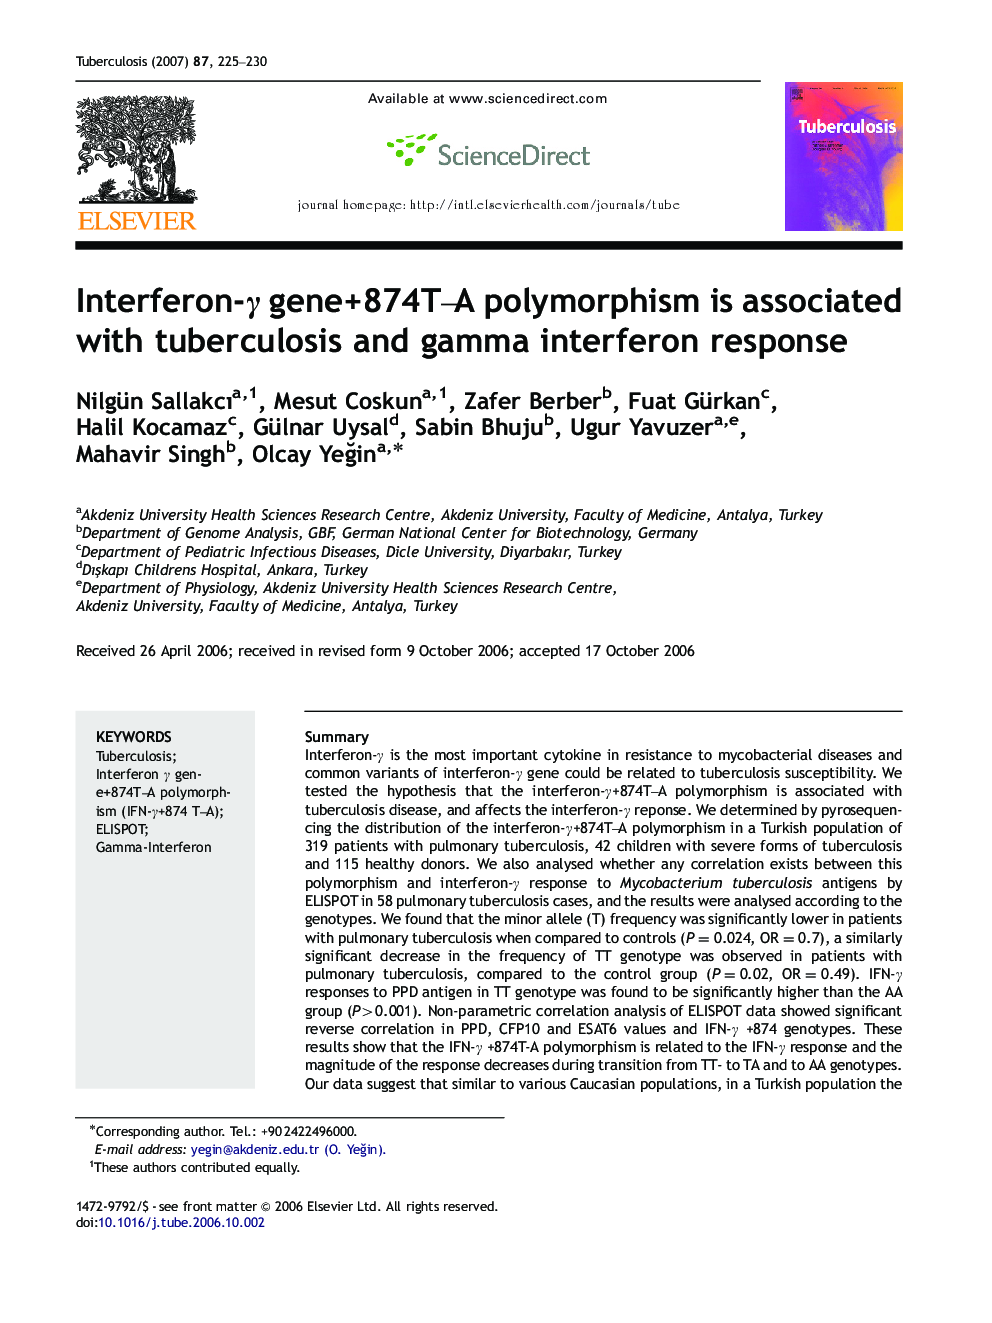 Interferon-γ gene+874T–A polymorphism is associated with tuberculosis and gamma interferon response